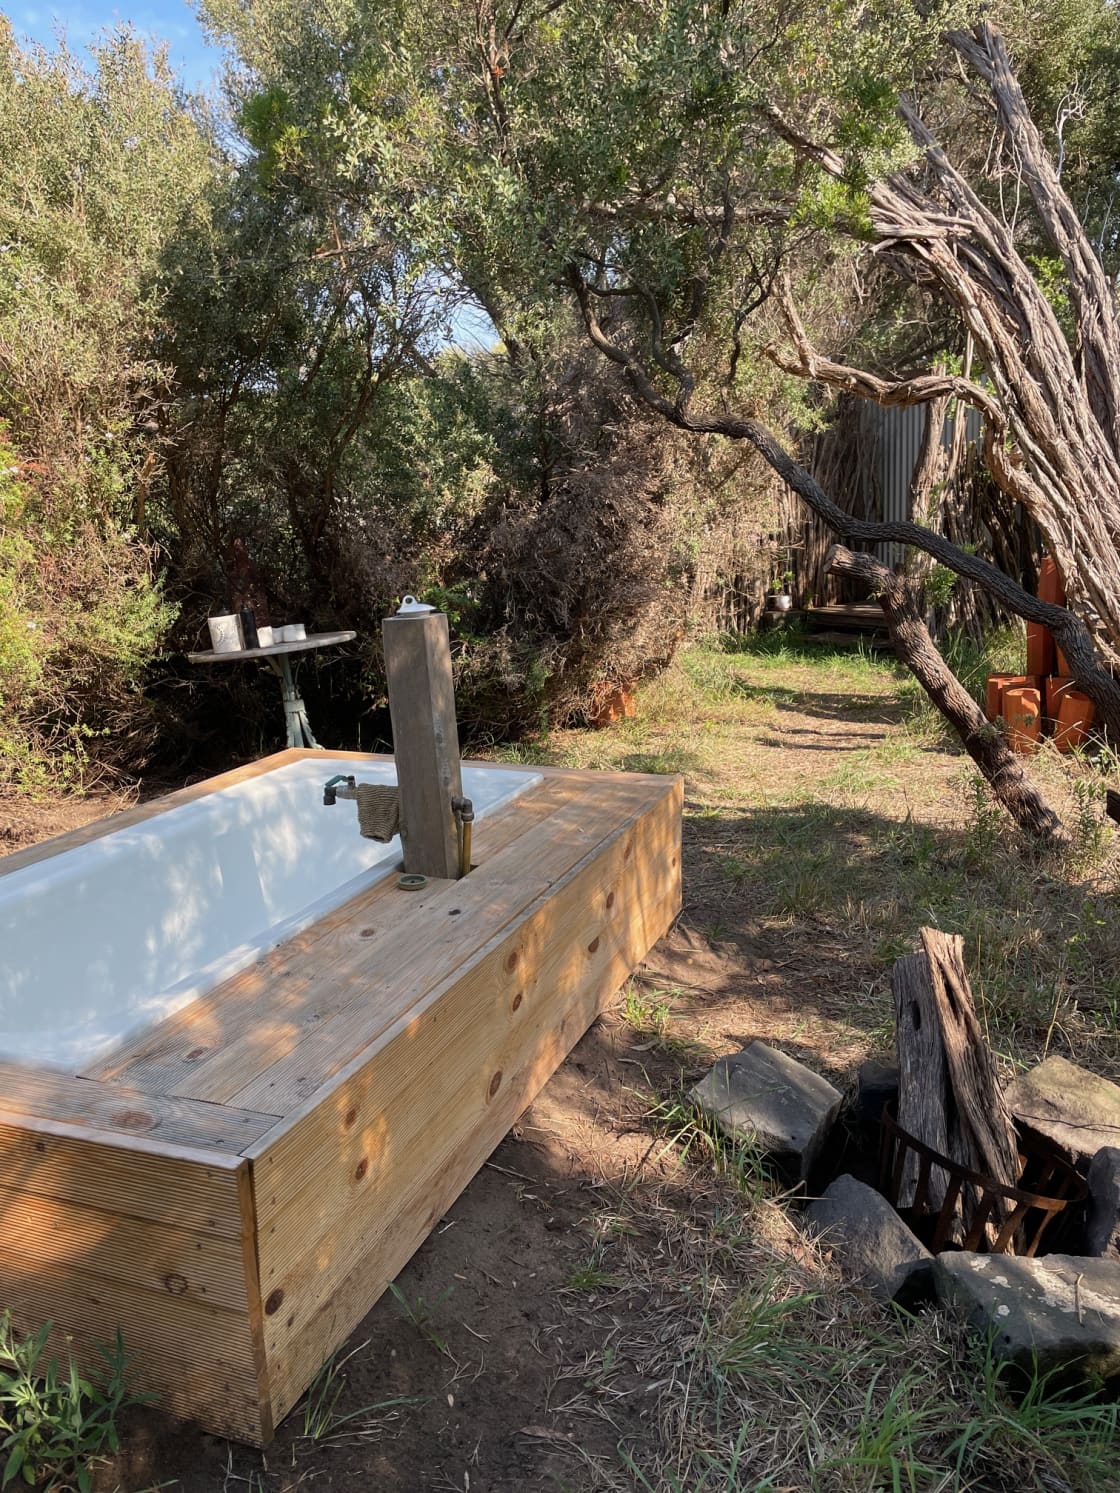 Hi adventurists, This outdoor bath is hot

My dream has been to own a place where travellers can meet, share stories, feel free and completely relax. 